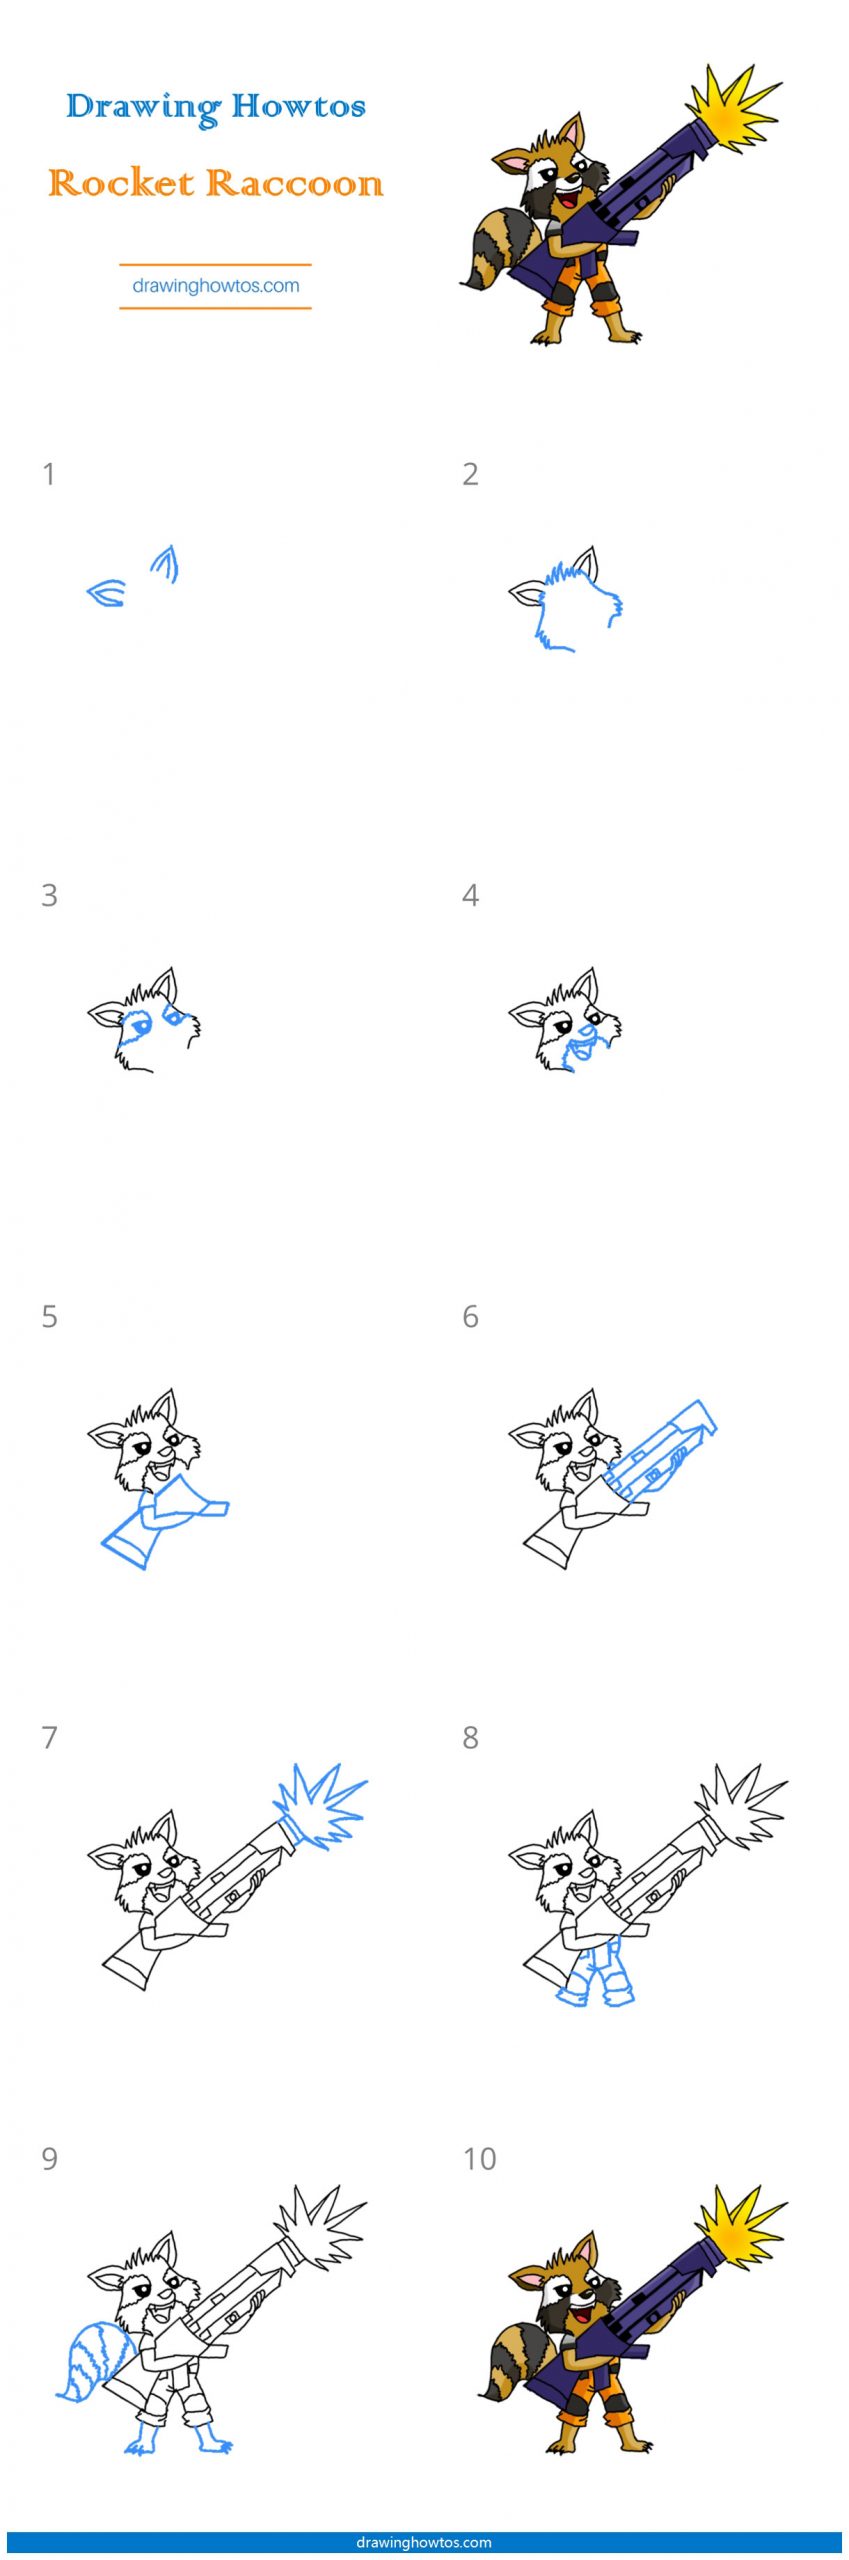 How to Draw Rocket Raccoon Step by Step